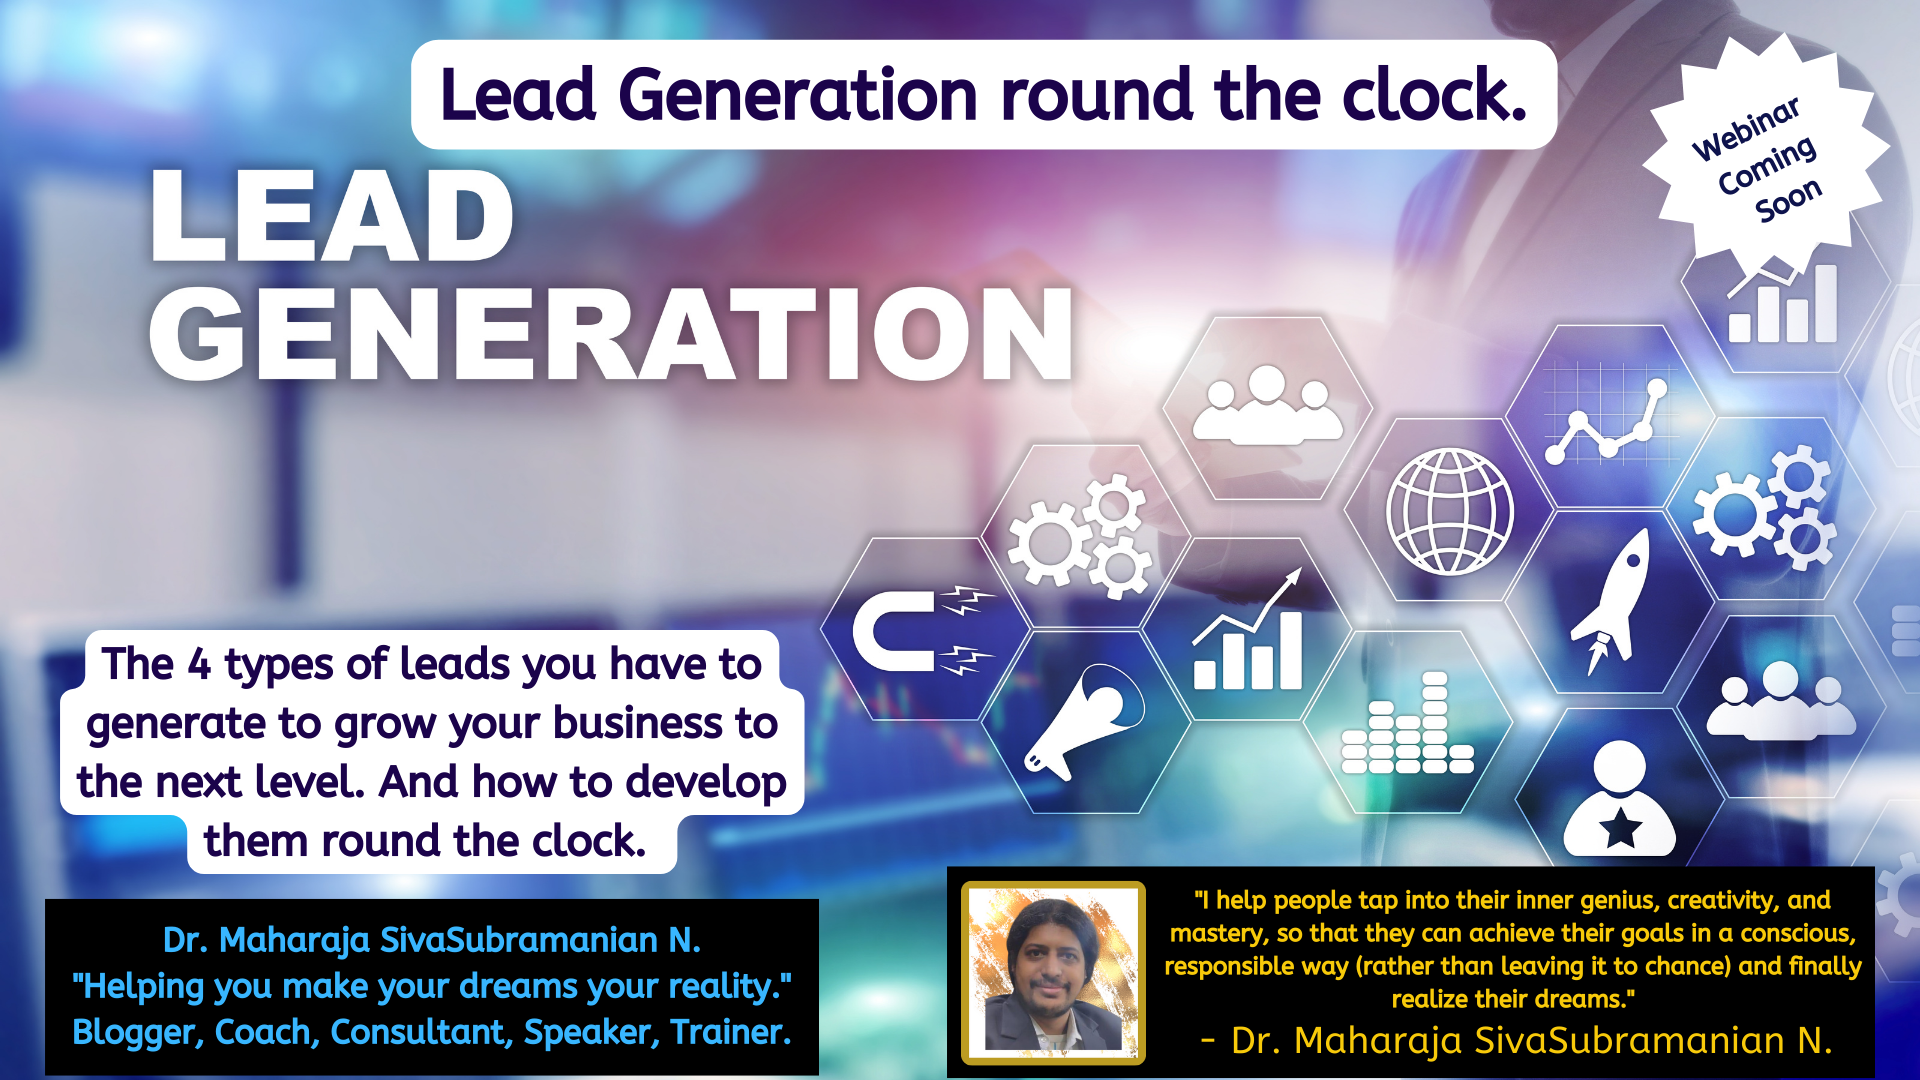 Lead Generation round the clock for professional speakers. – Upcoming free webinar.